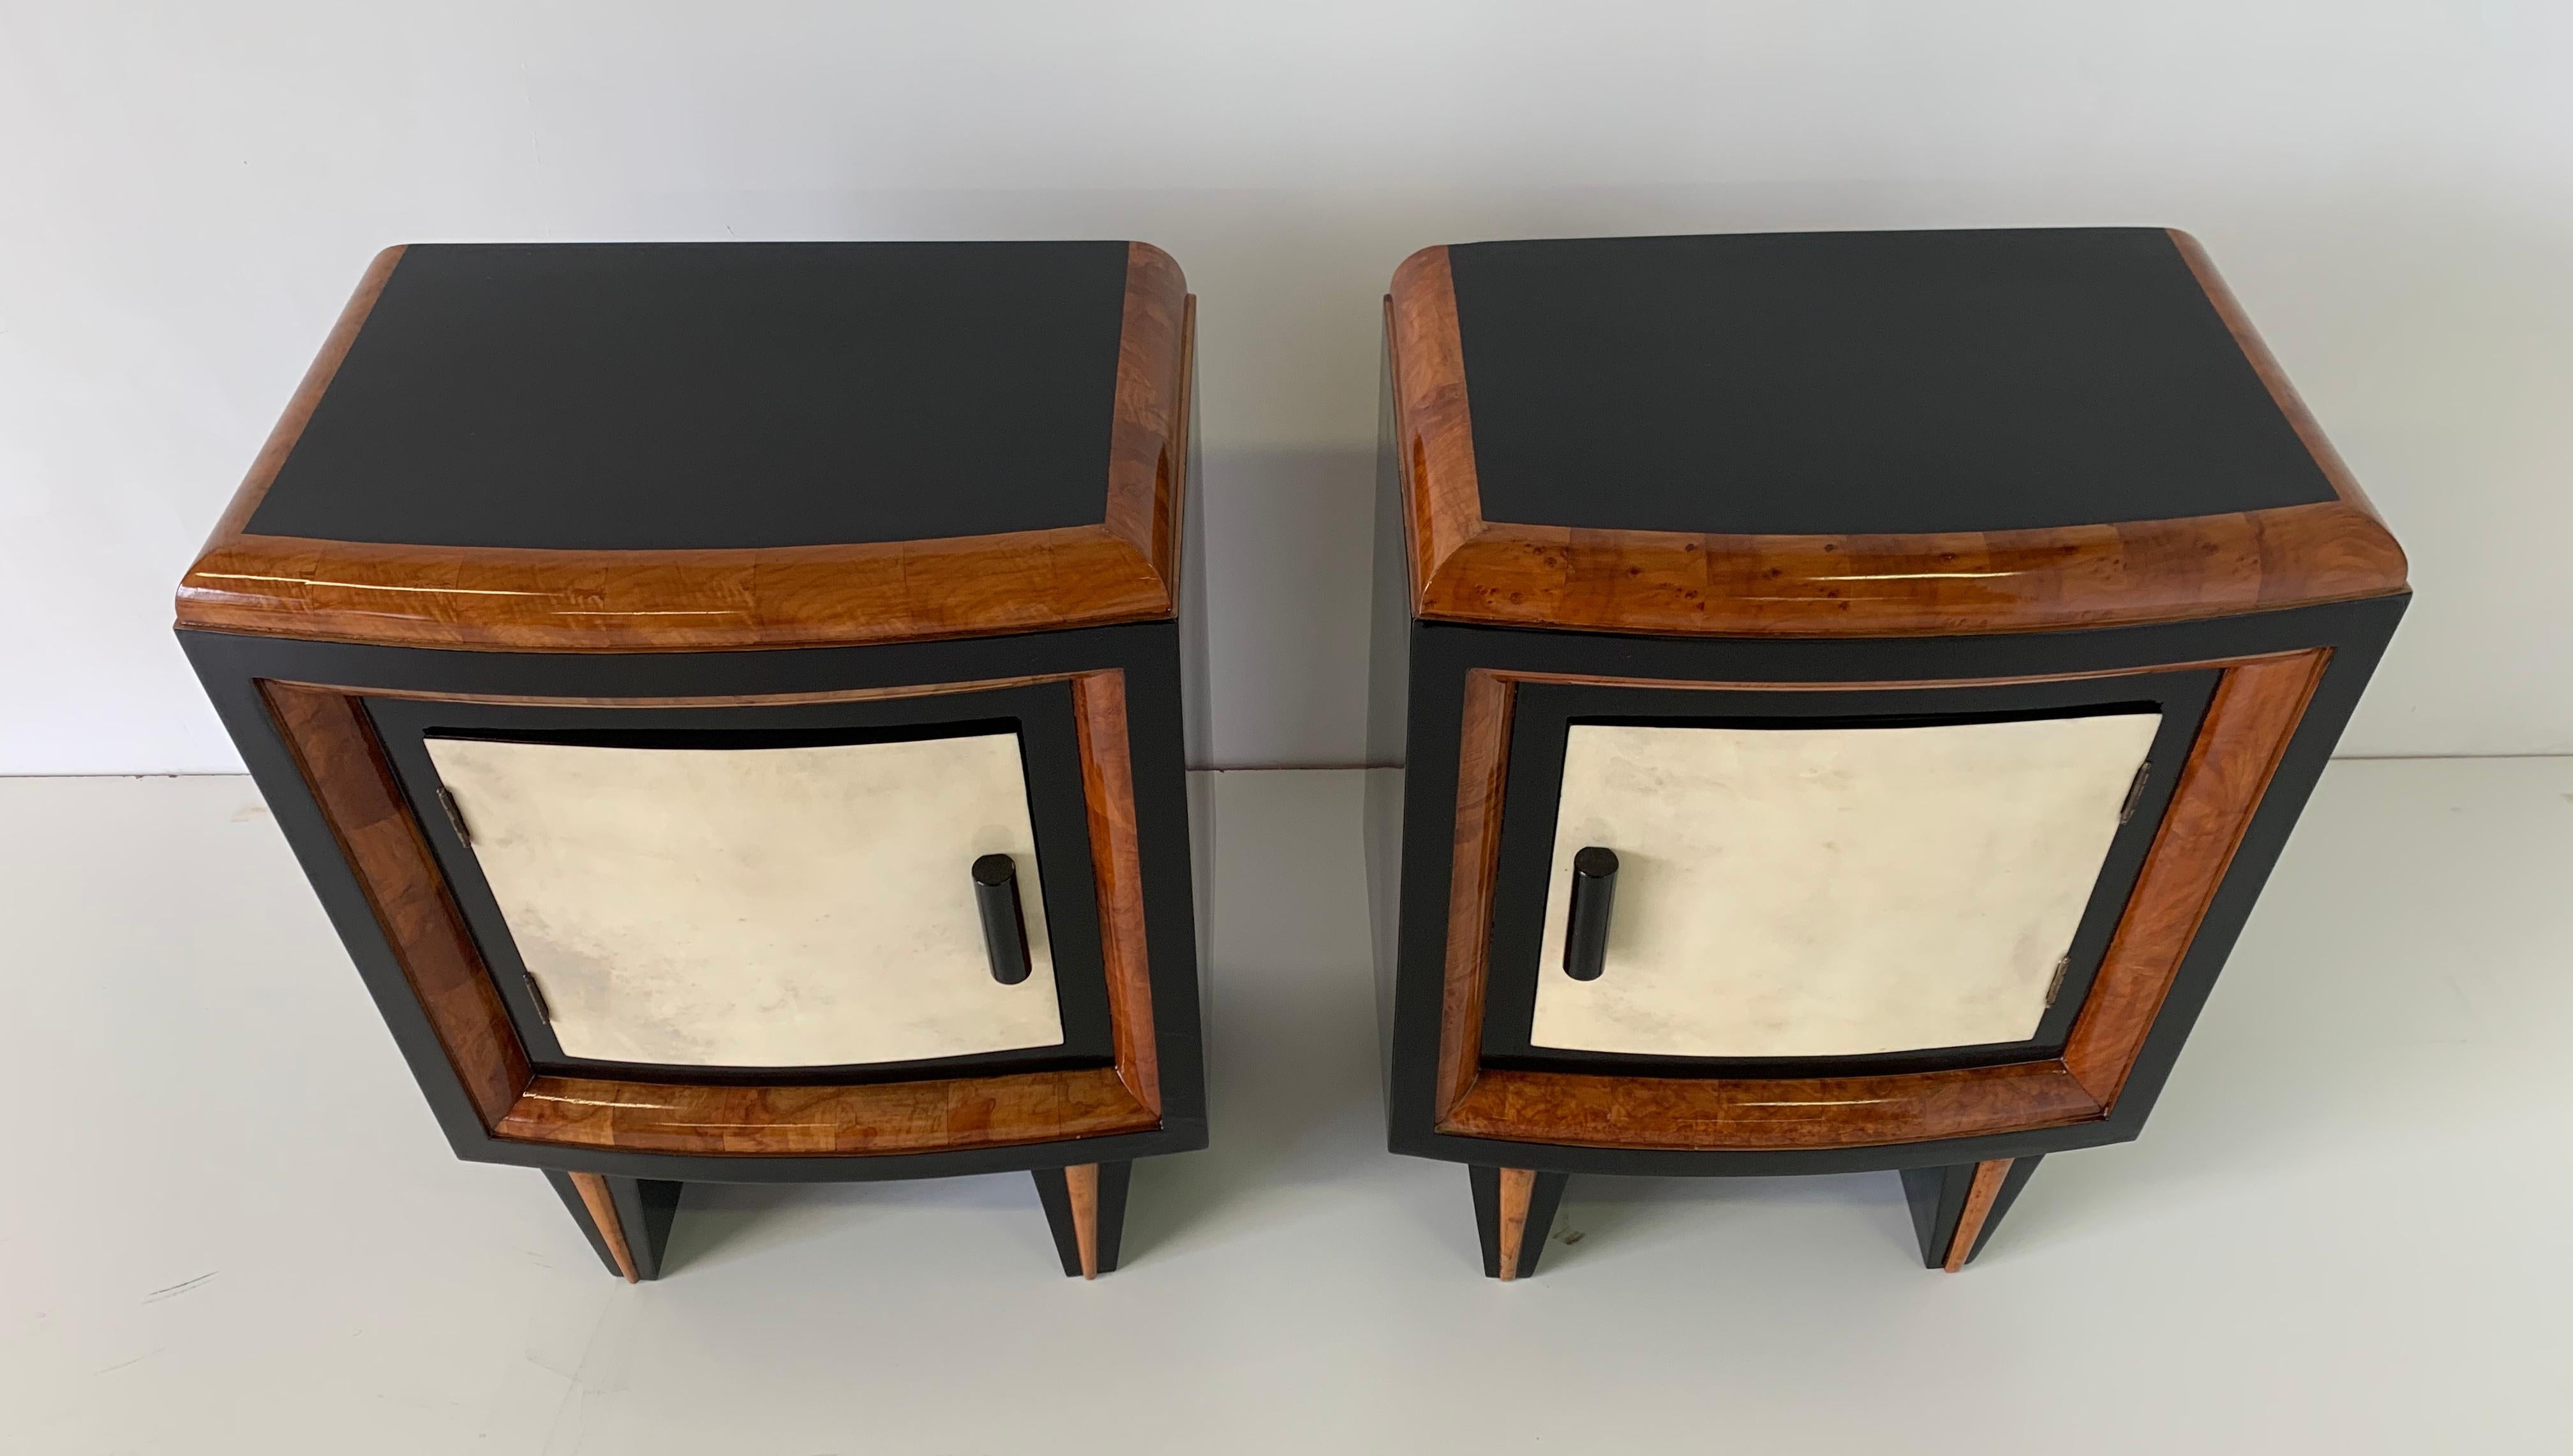 Italian bedside tables from the 1930s produced in Italy.
The front of the doors are in parchment while the profiles are in walnut.
The structure and handles are in black lacquered wood.
Completely restored.
      